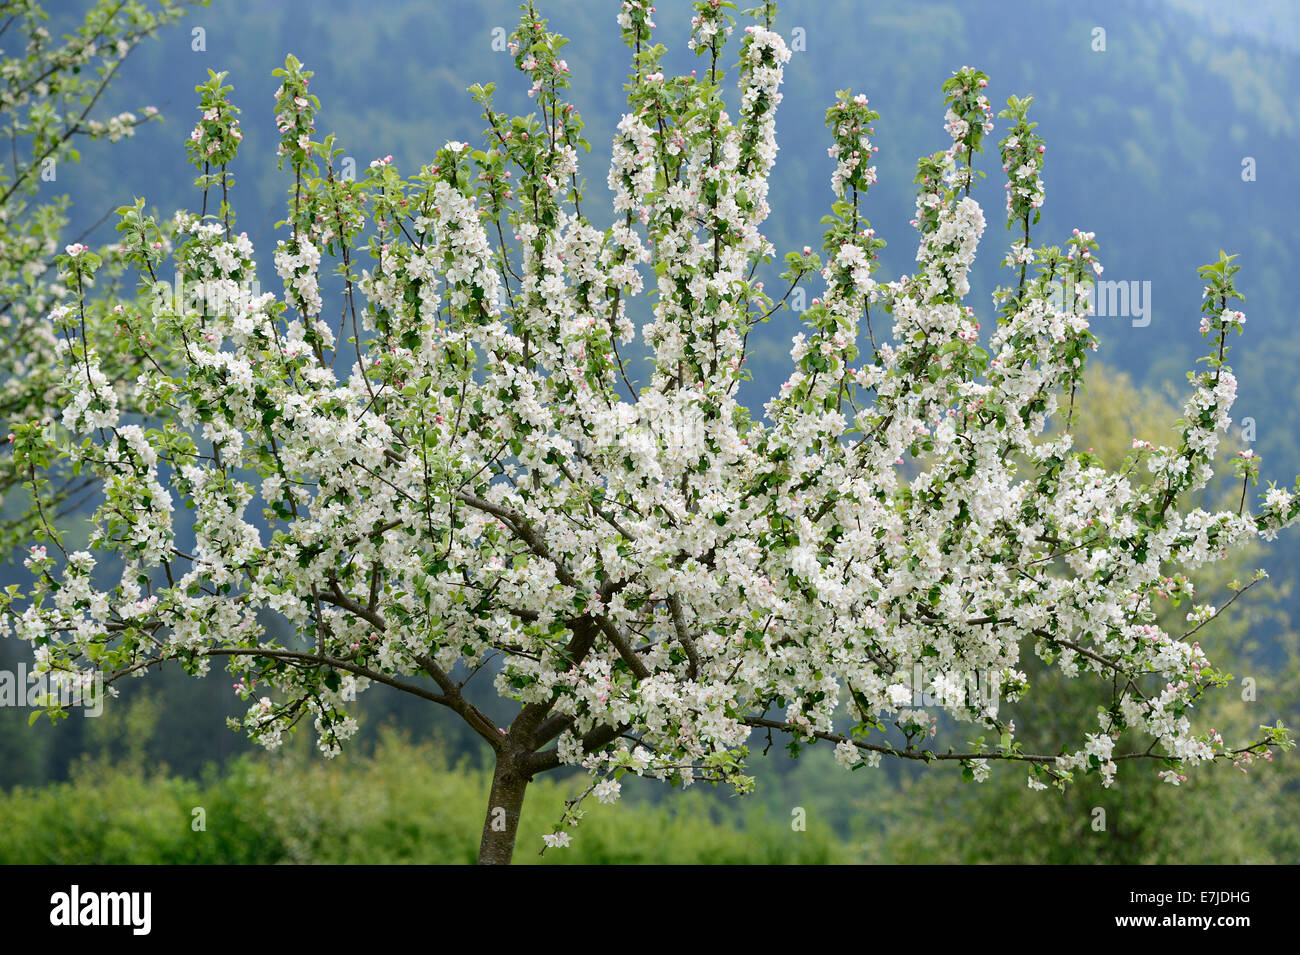 blossoms, spring, tree blossom, tender blossoms, sprout, Fruit blossoms, Petals, Germany, Europe, Stock Photo